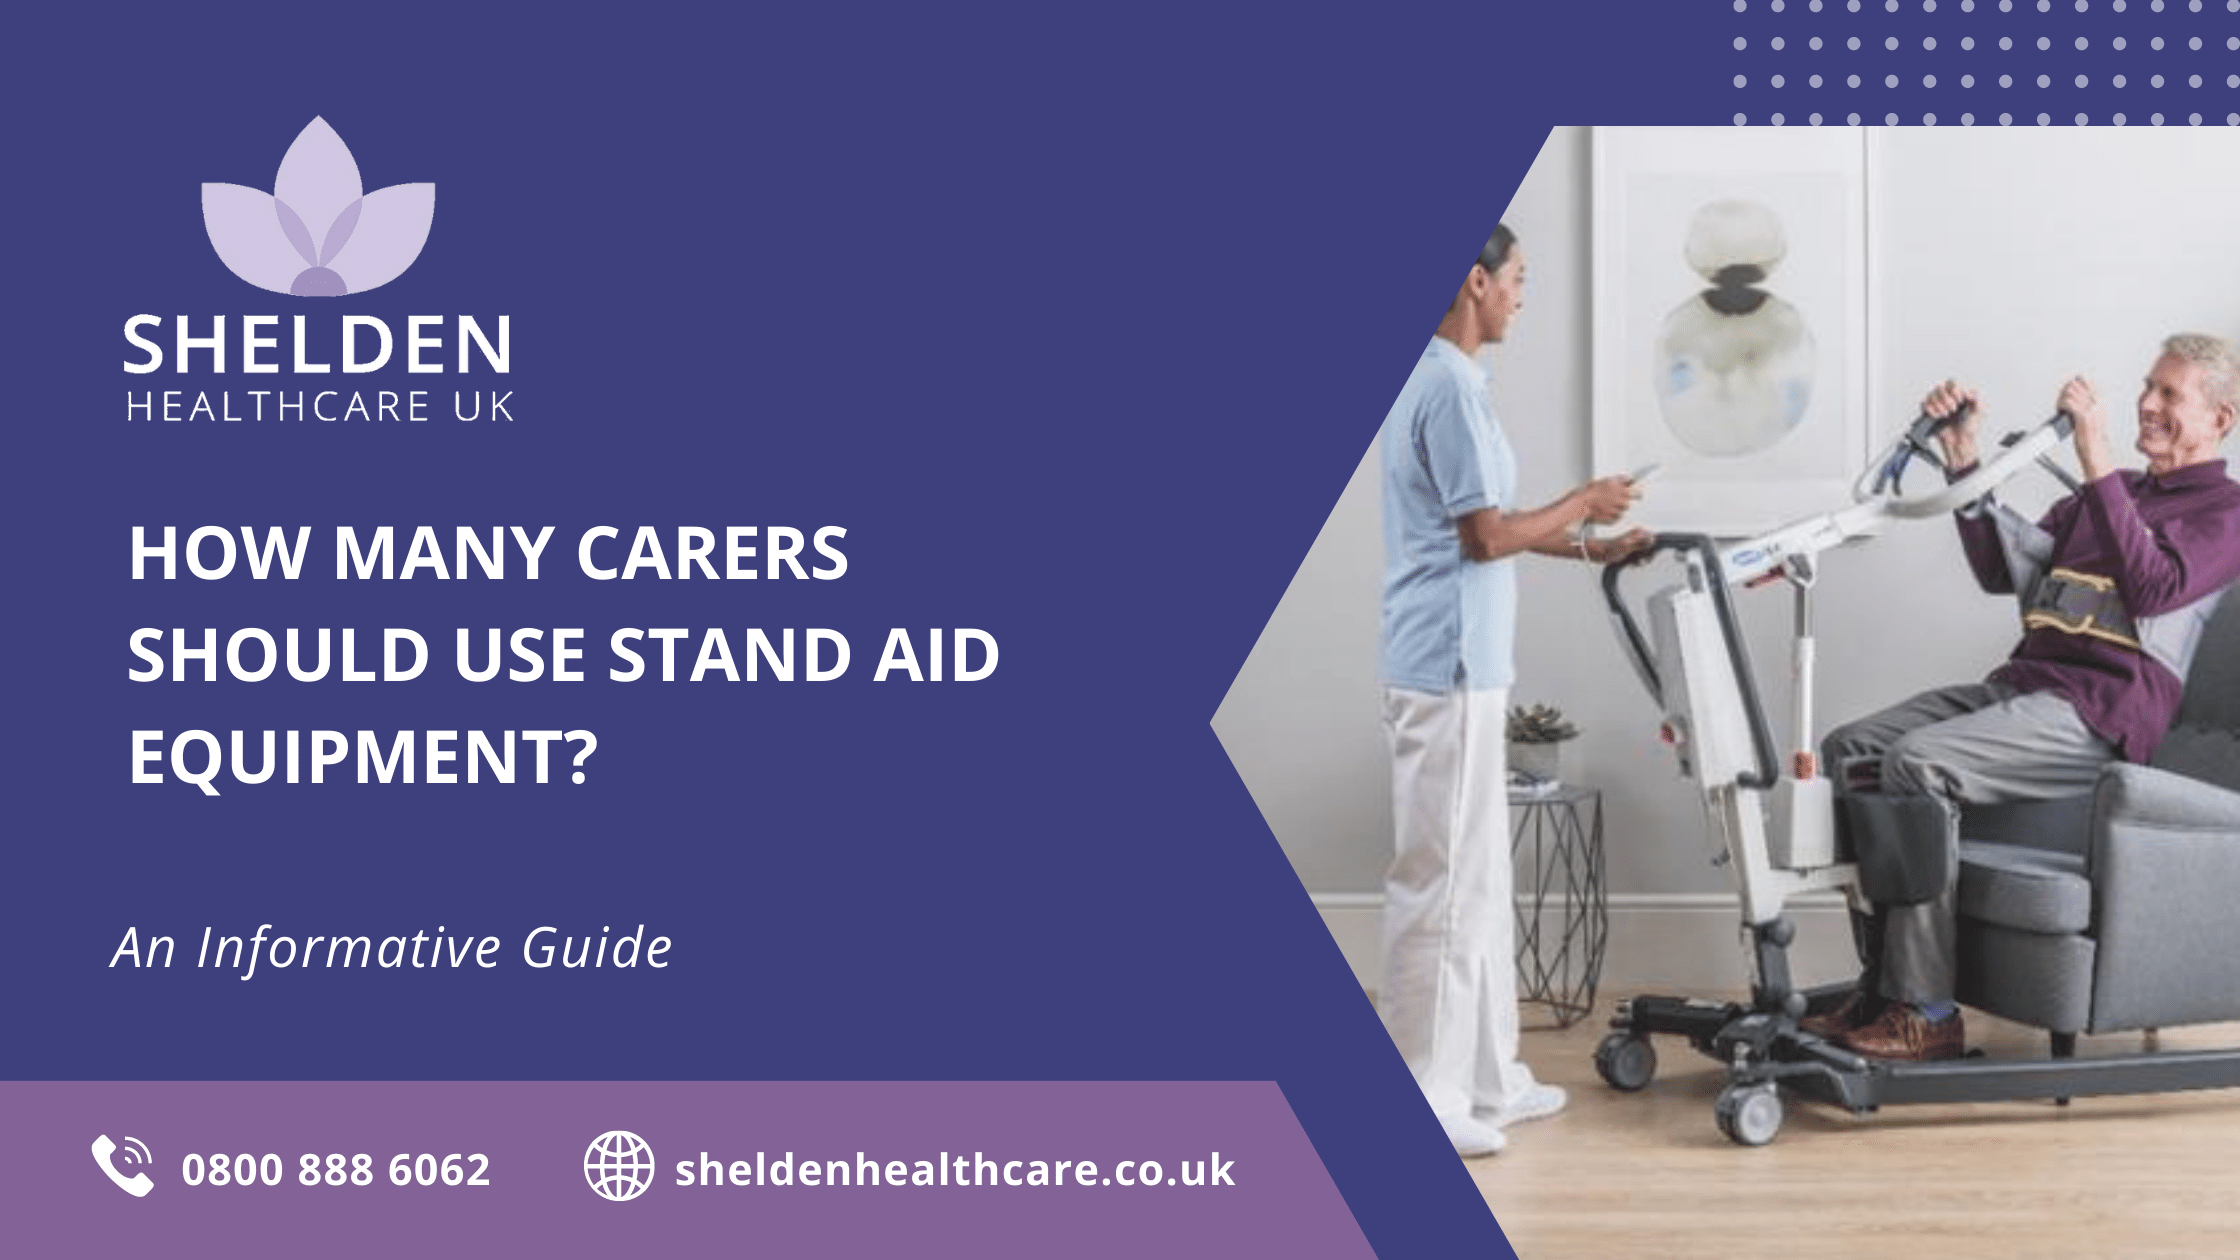 How Many Carers Should Use Stand Aid Equipment